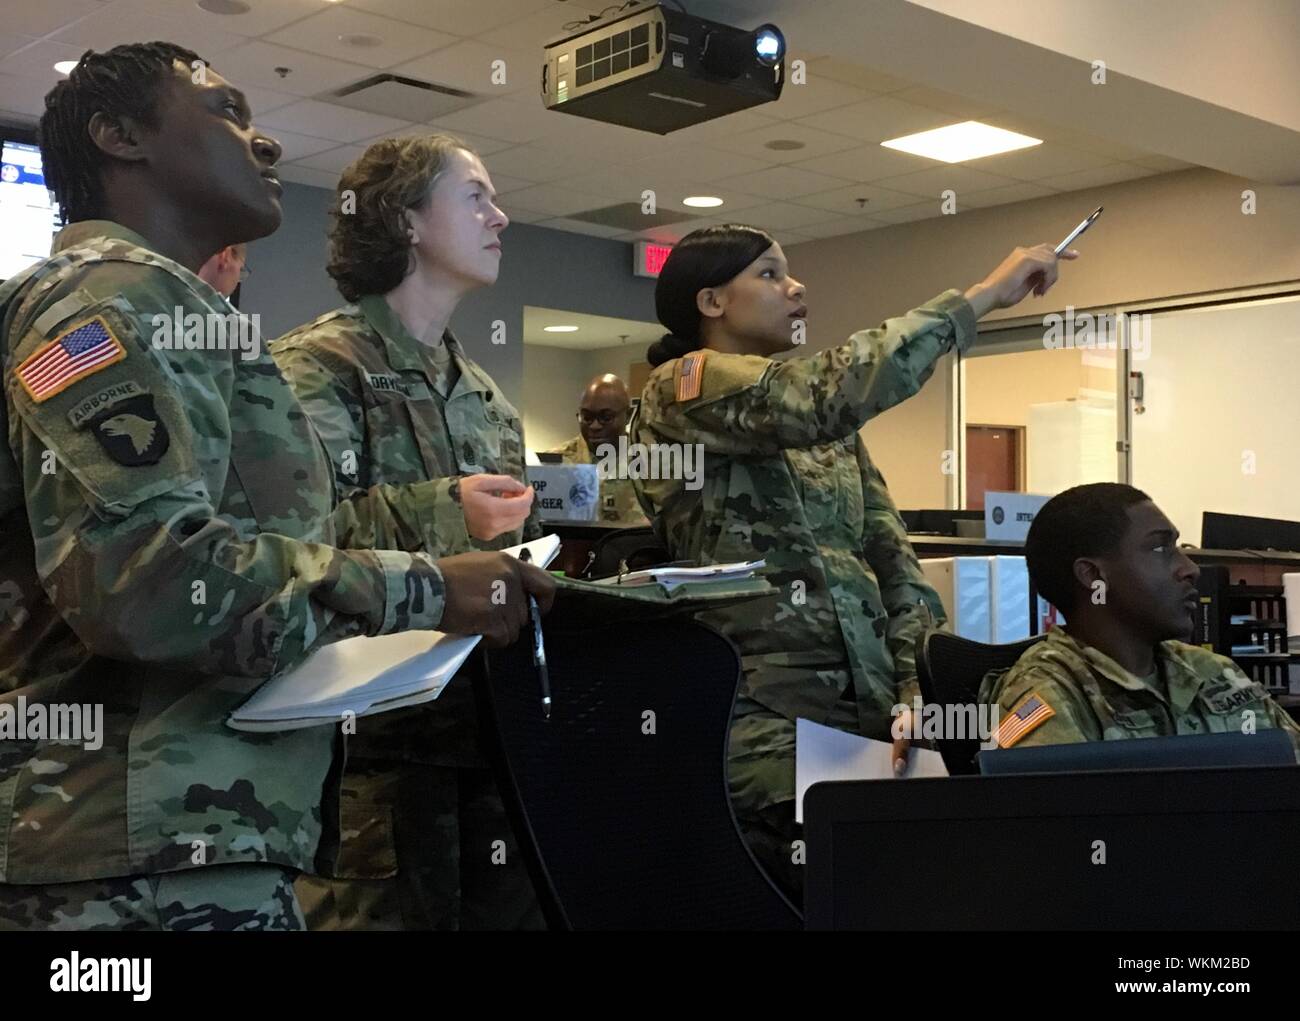 Georgia Army National Guard Soldiers review possible Hurricane Dorian mission scenarios in the Ga, September 3, 2019. DoD Joint Operations Center in Marietta, Ga. Sept 3, 2019. The Soldiers are Sgt. 1st Class Toya Cullwell, Sergeant Major Rachel Dryden, Sgt. Shaztada Wilson and Sgt. Eric Cooper. () Stock Photo